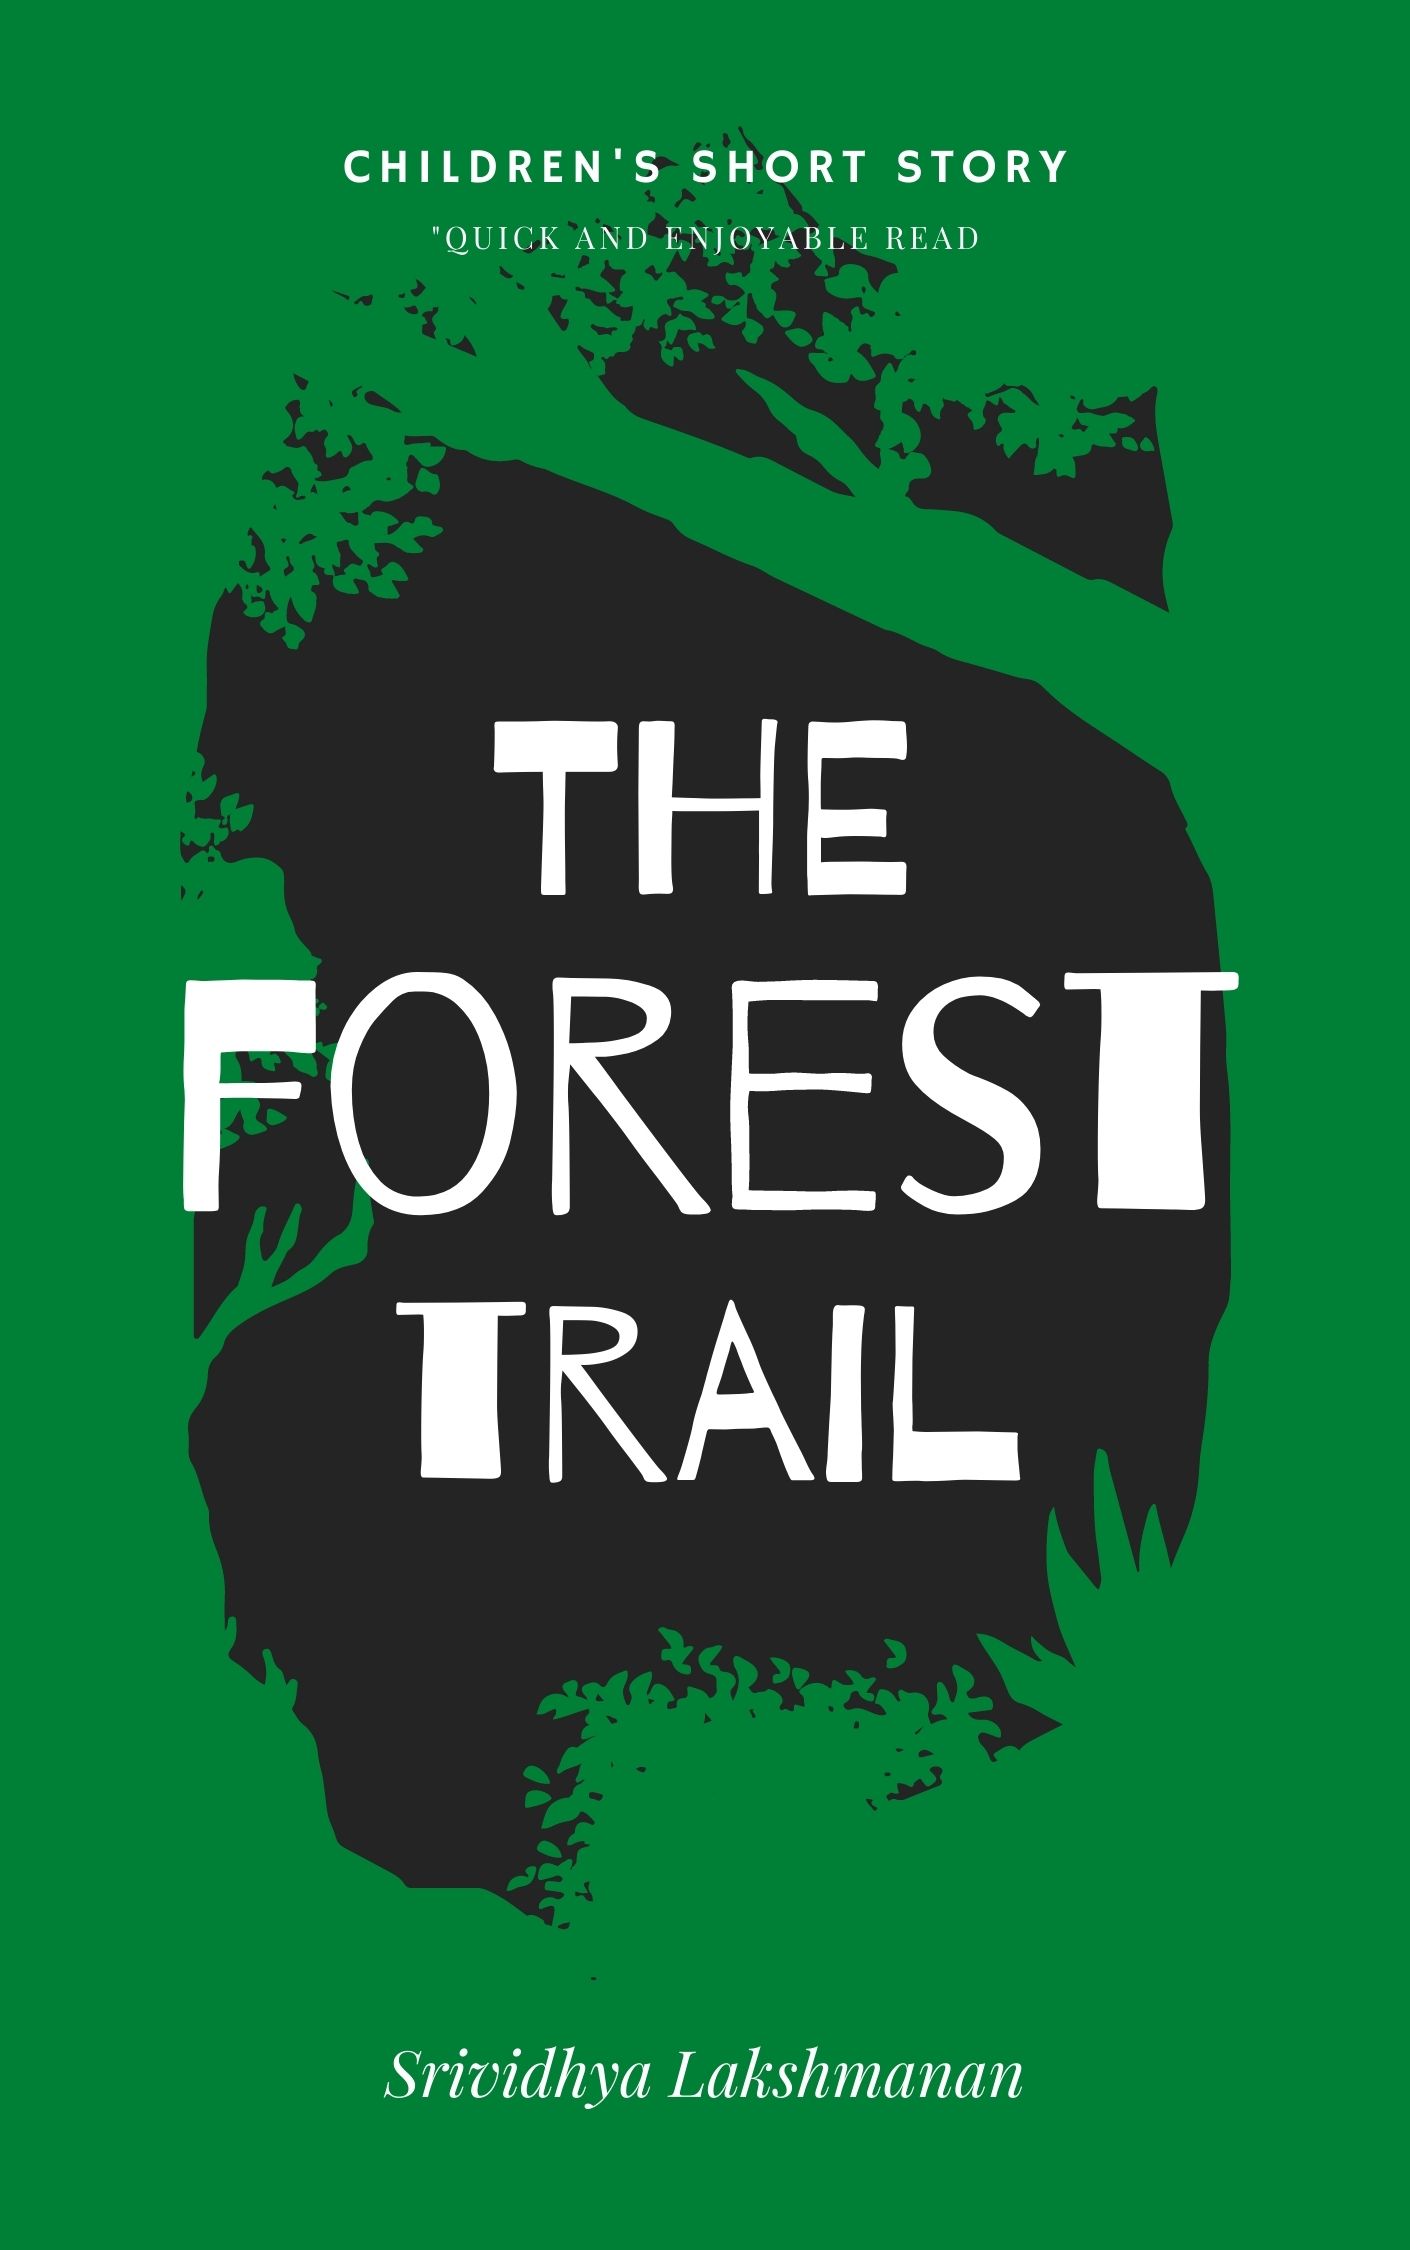 FREE: The Forest Trail by Srividhya Lakshmanan